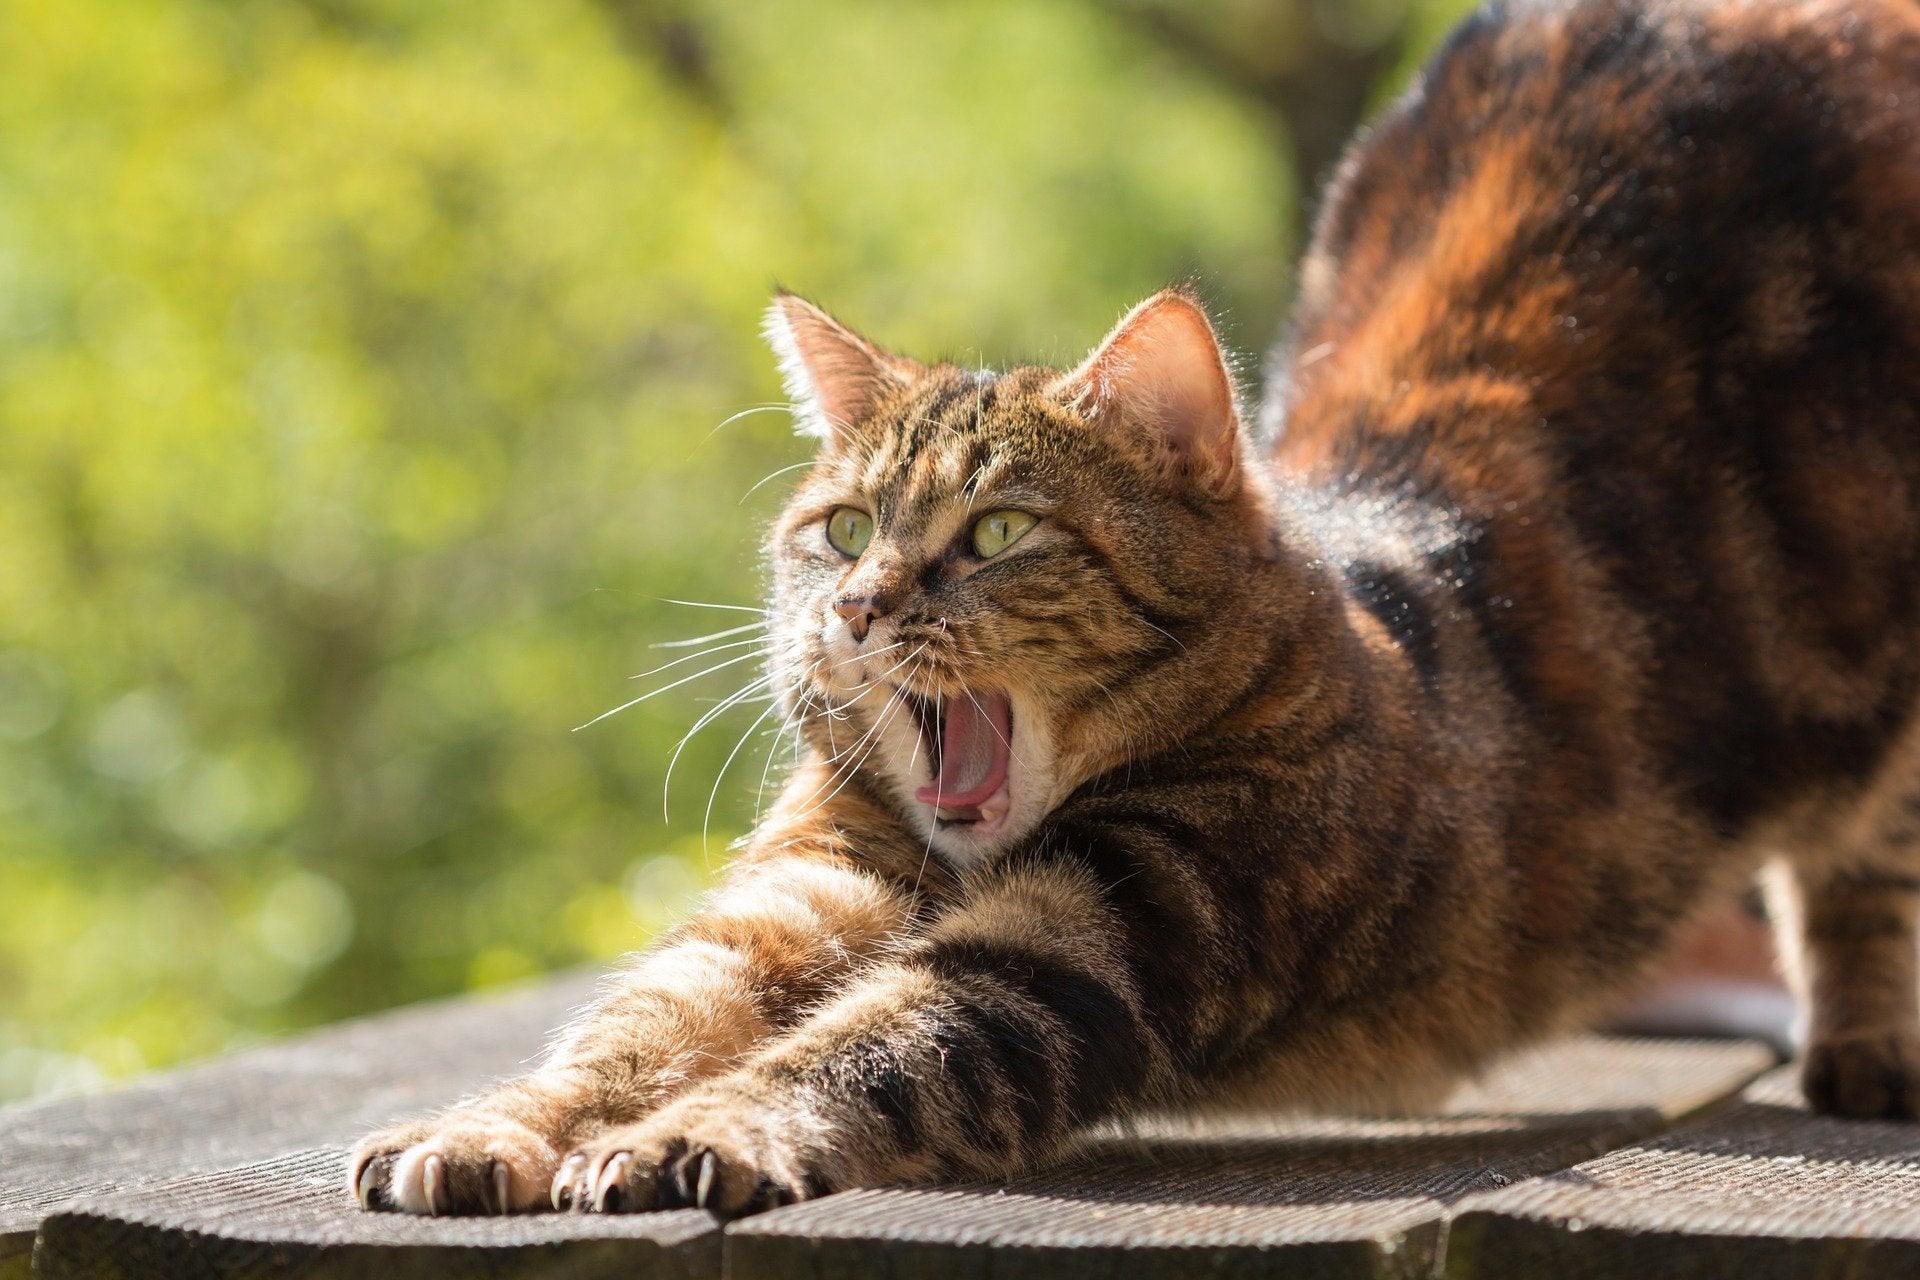 Brown cat stretching with her mouth opened